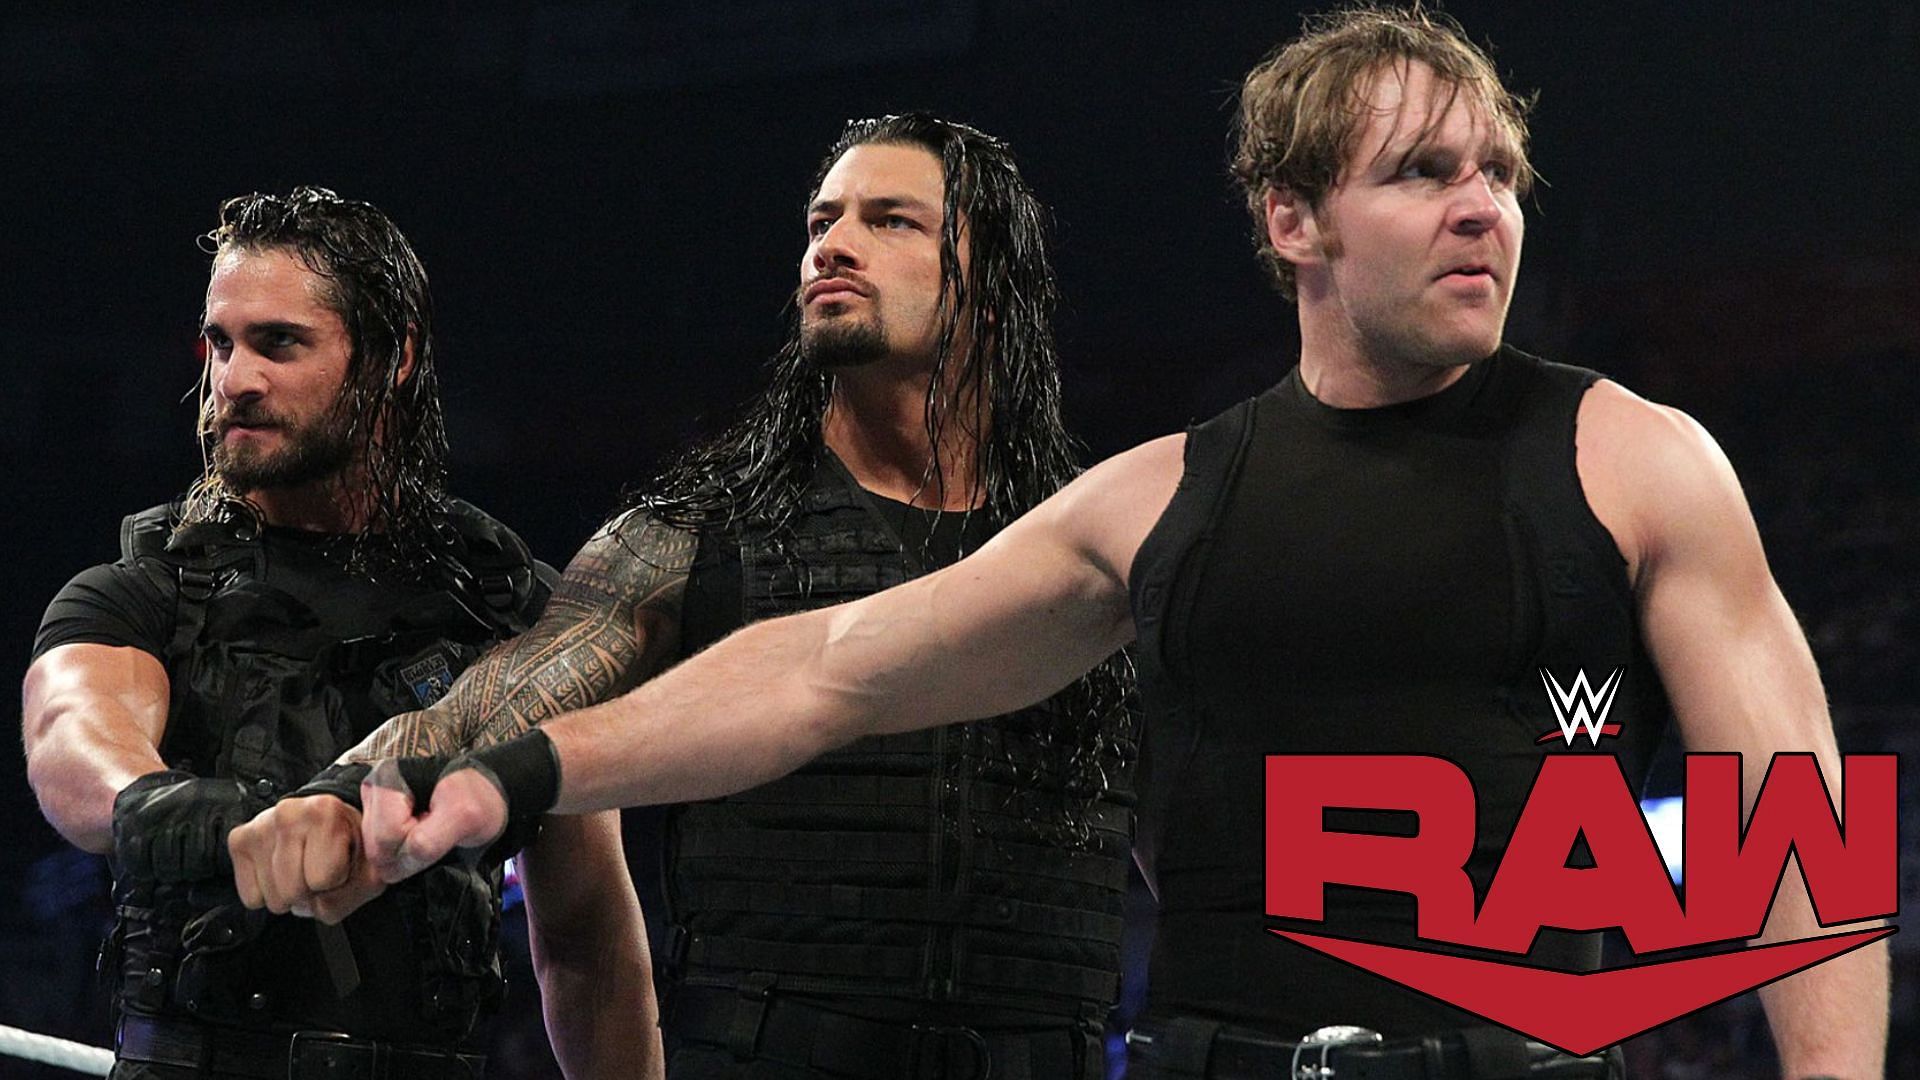 Will fans ever see The Shield reunite again?